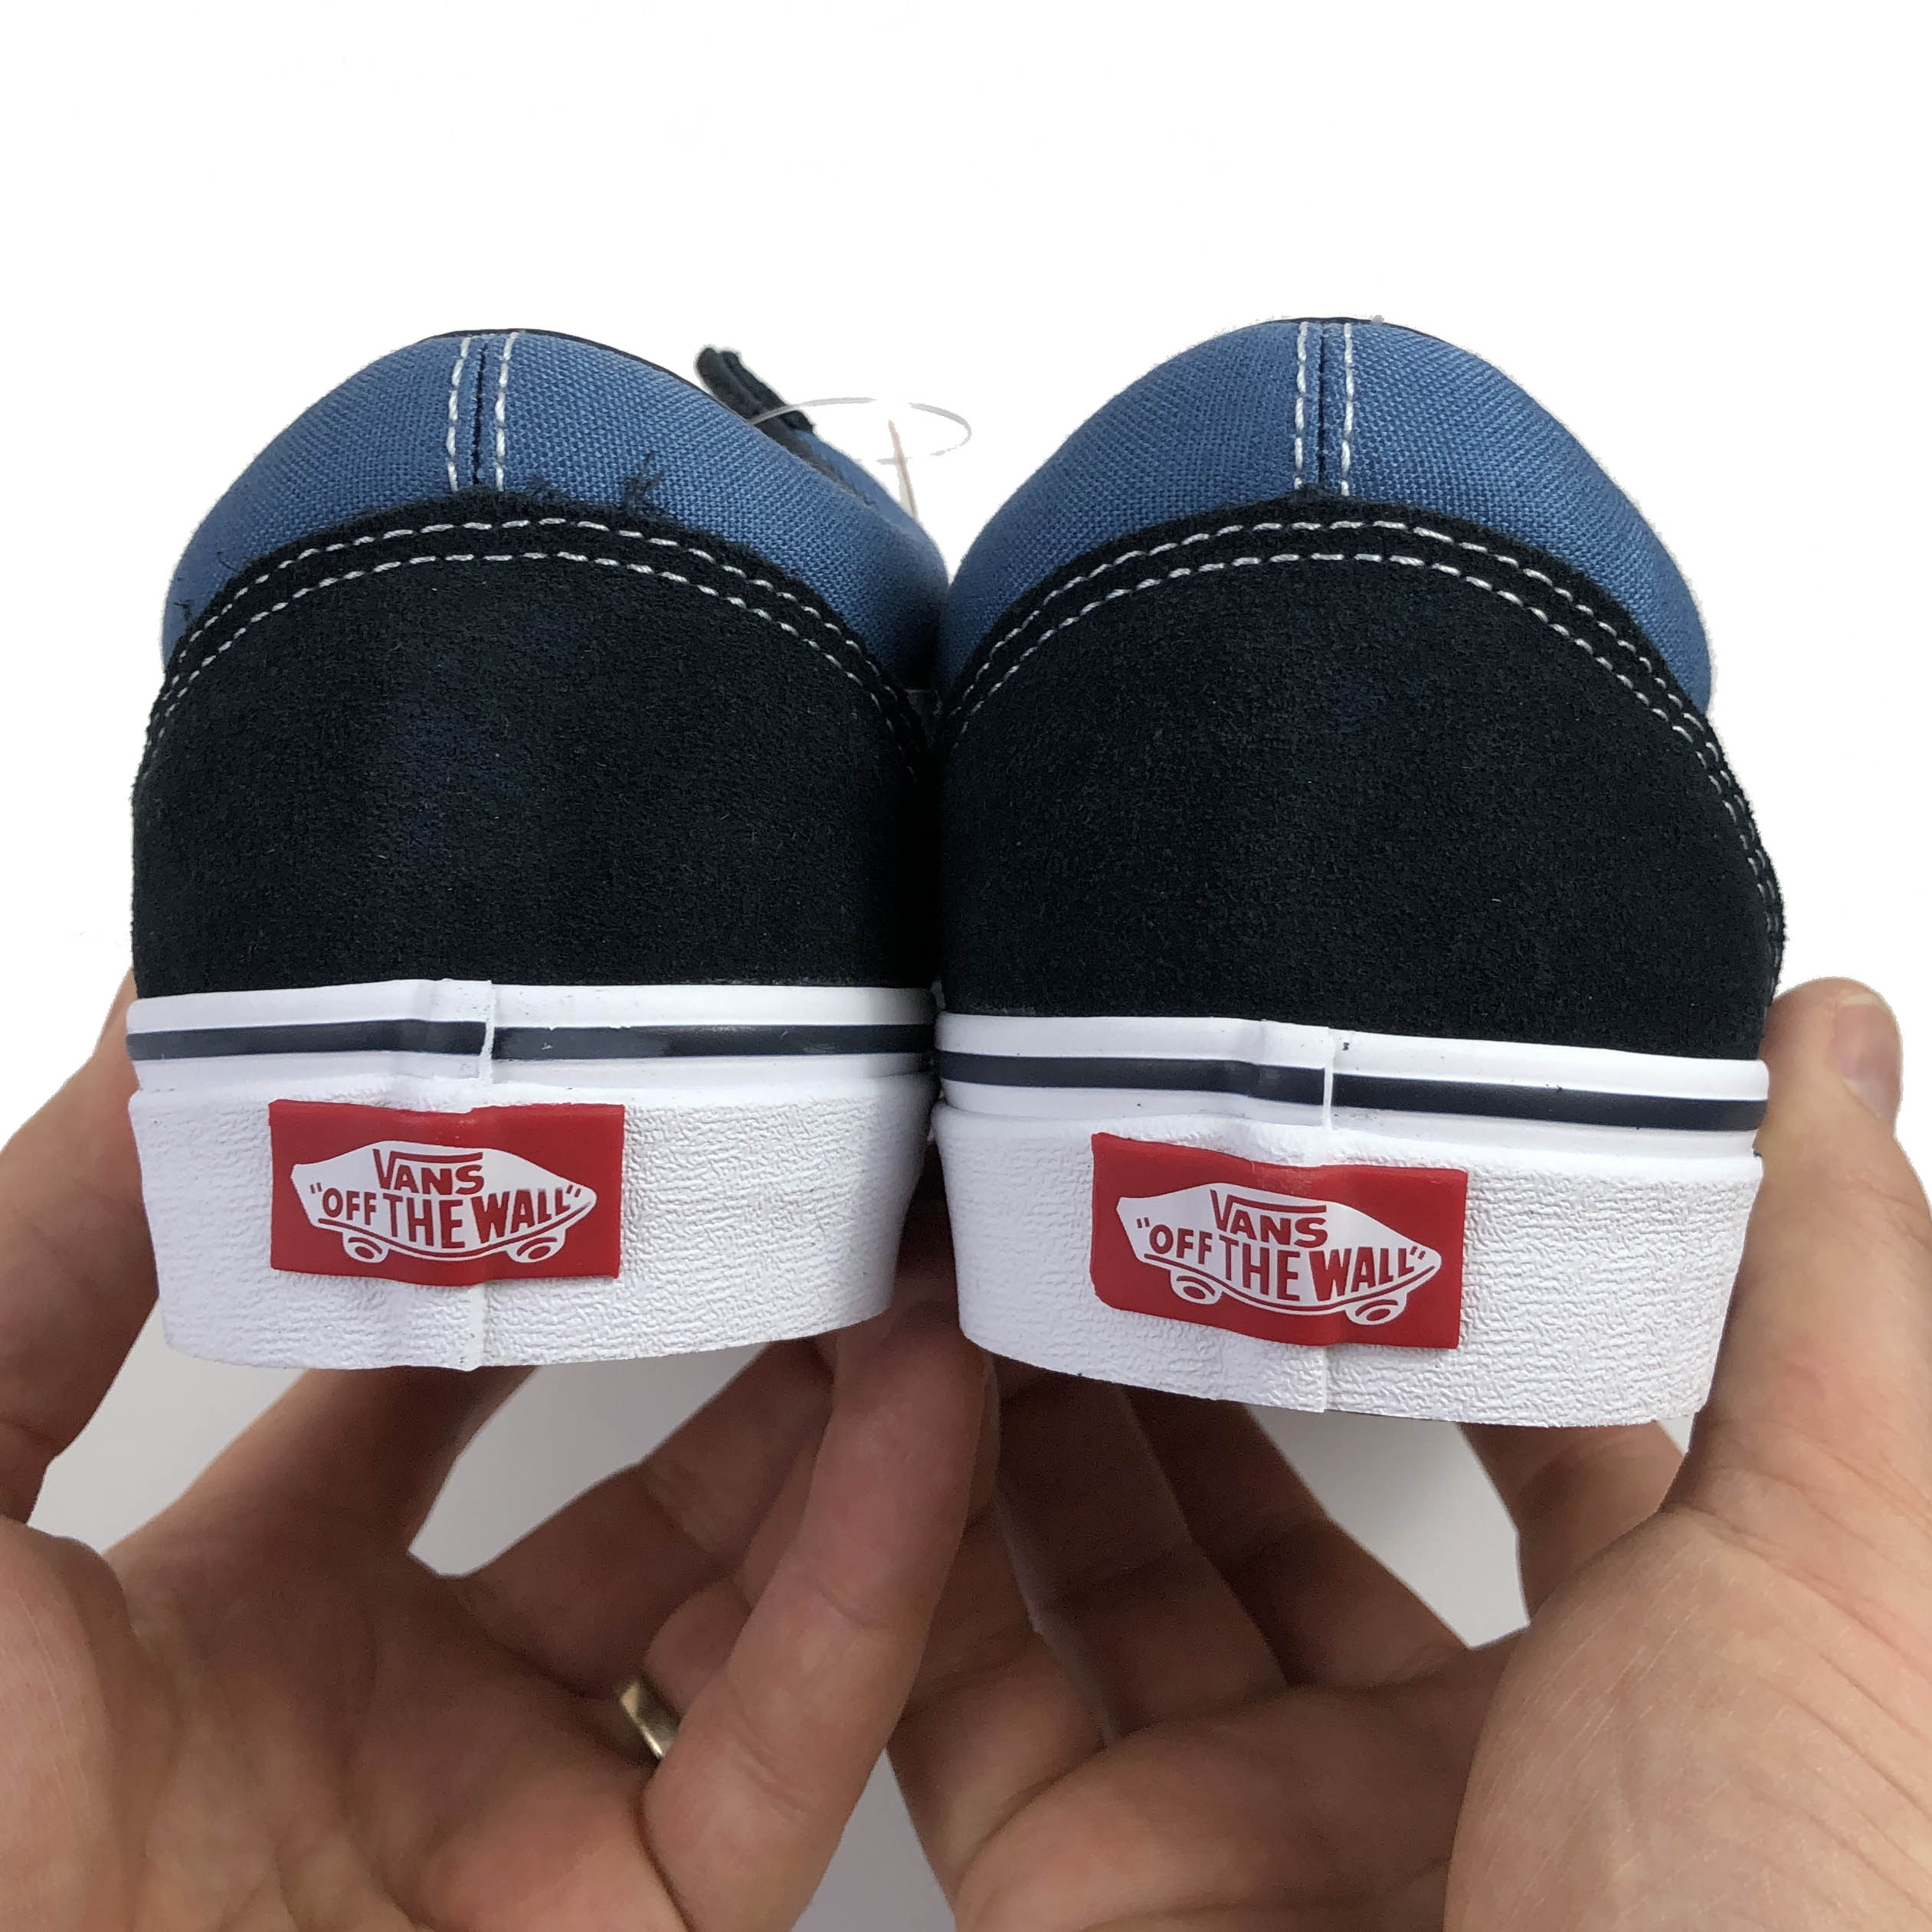 Vans-QC-Heel-View - How Shoes are Made 